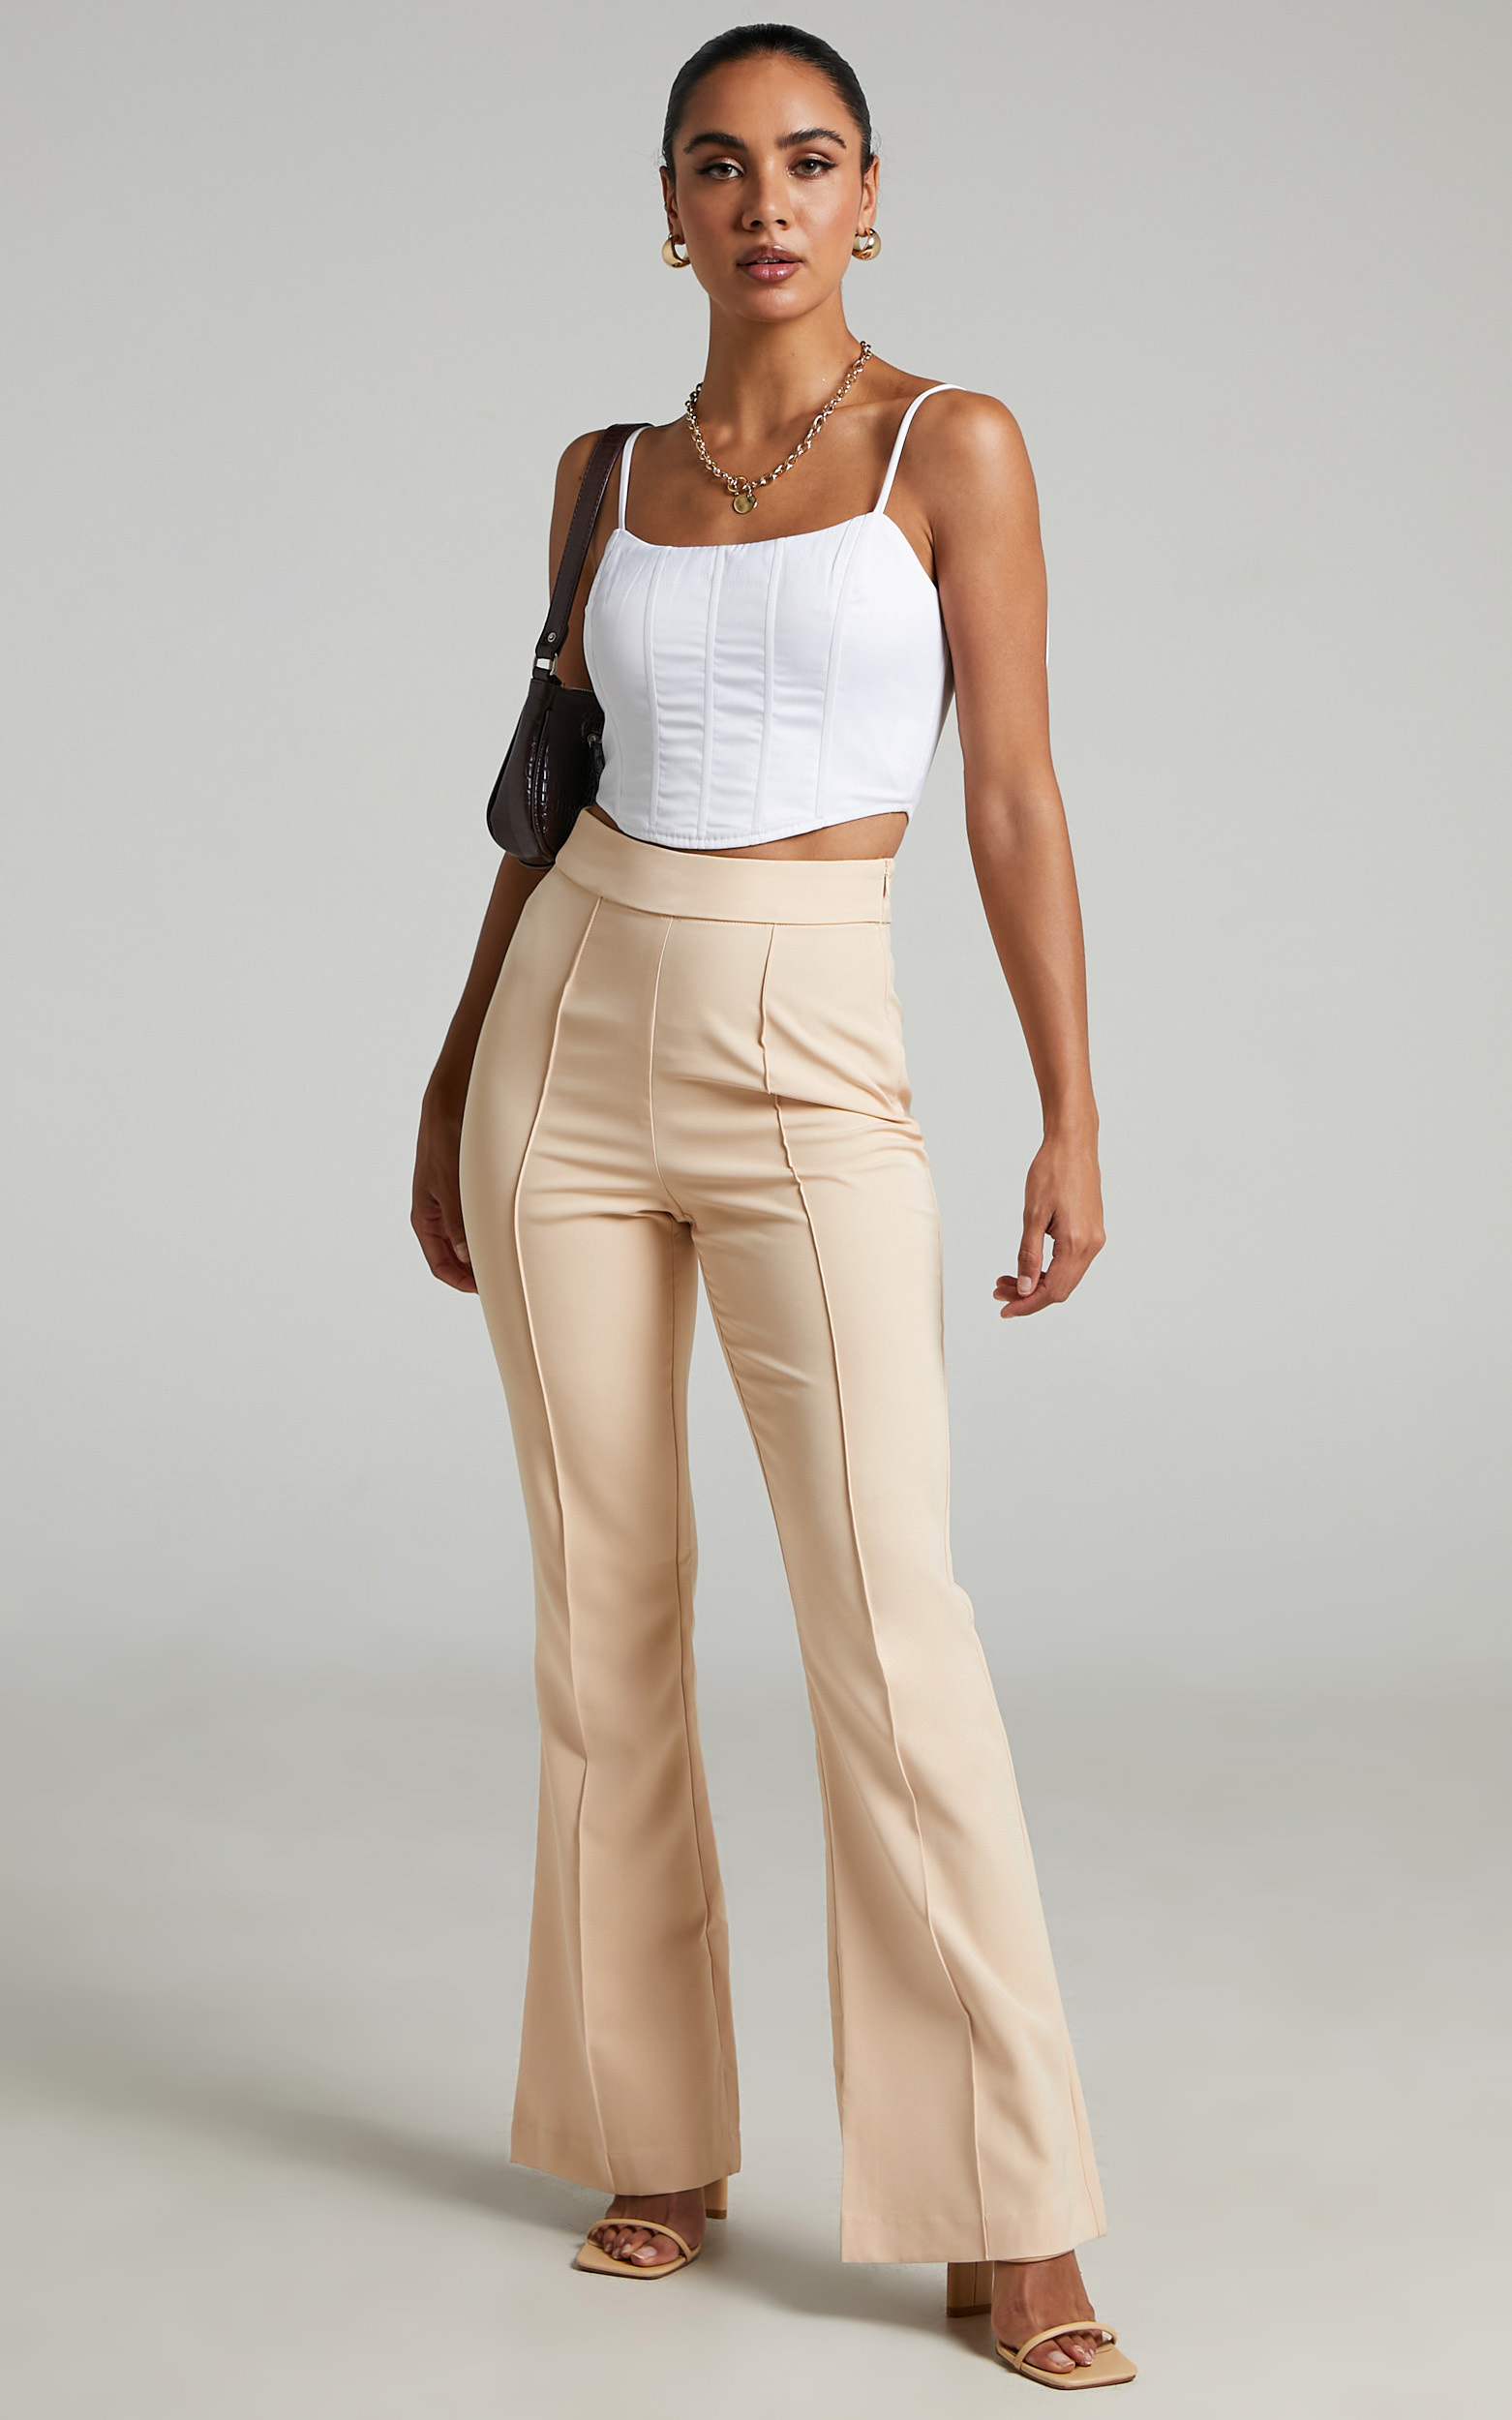 Roschel High Waisted Flared Pants in Stone - 06, NEU2, hi-res image number null